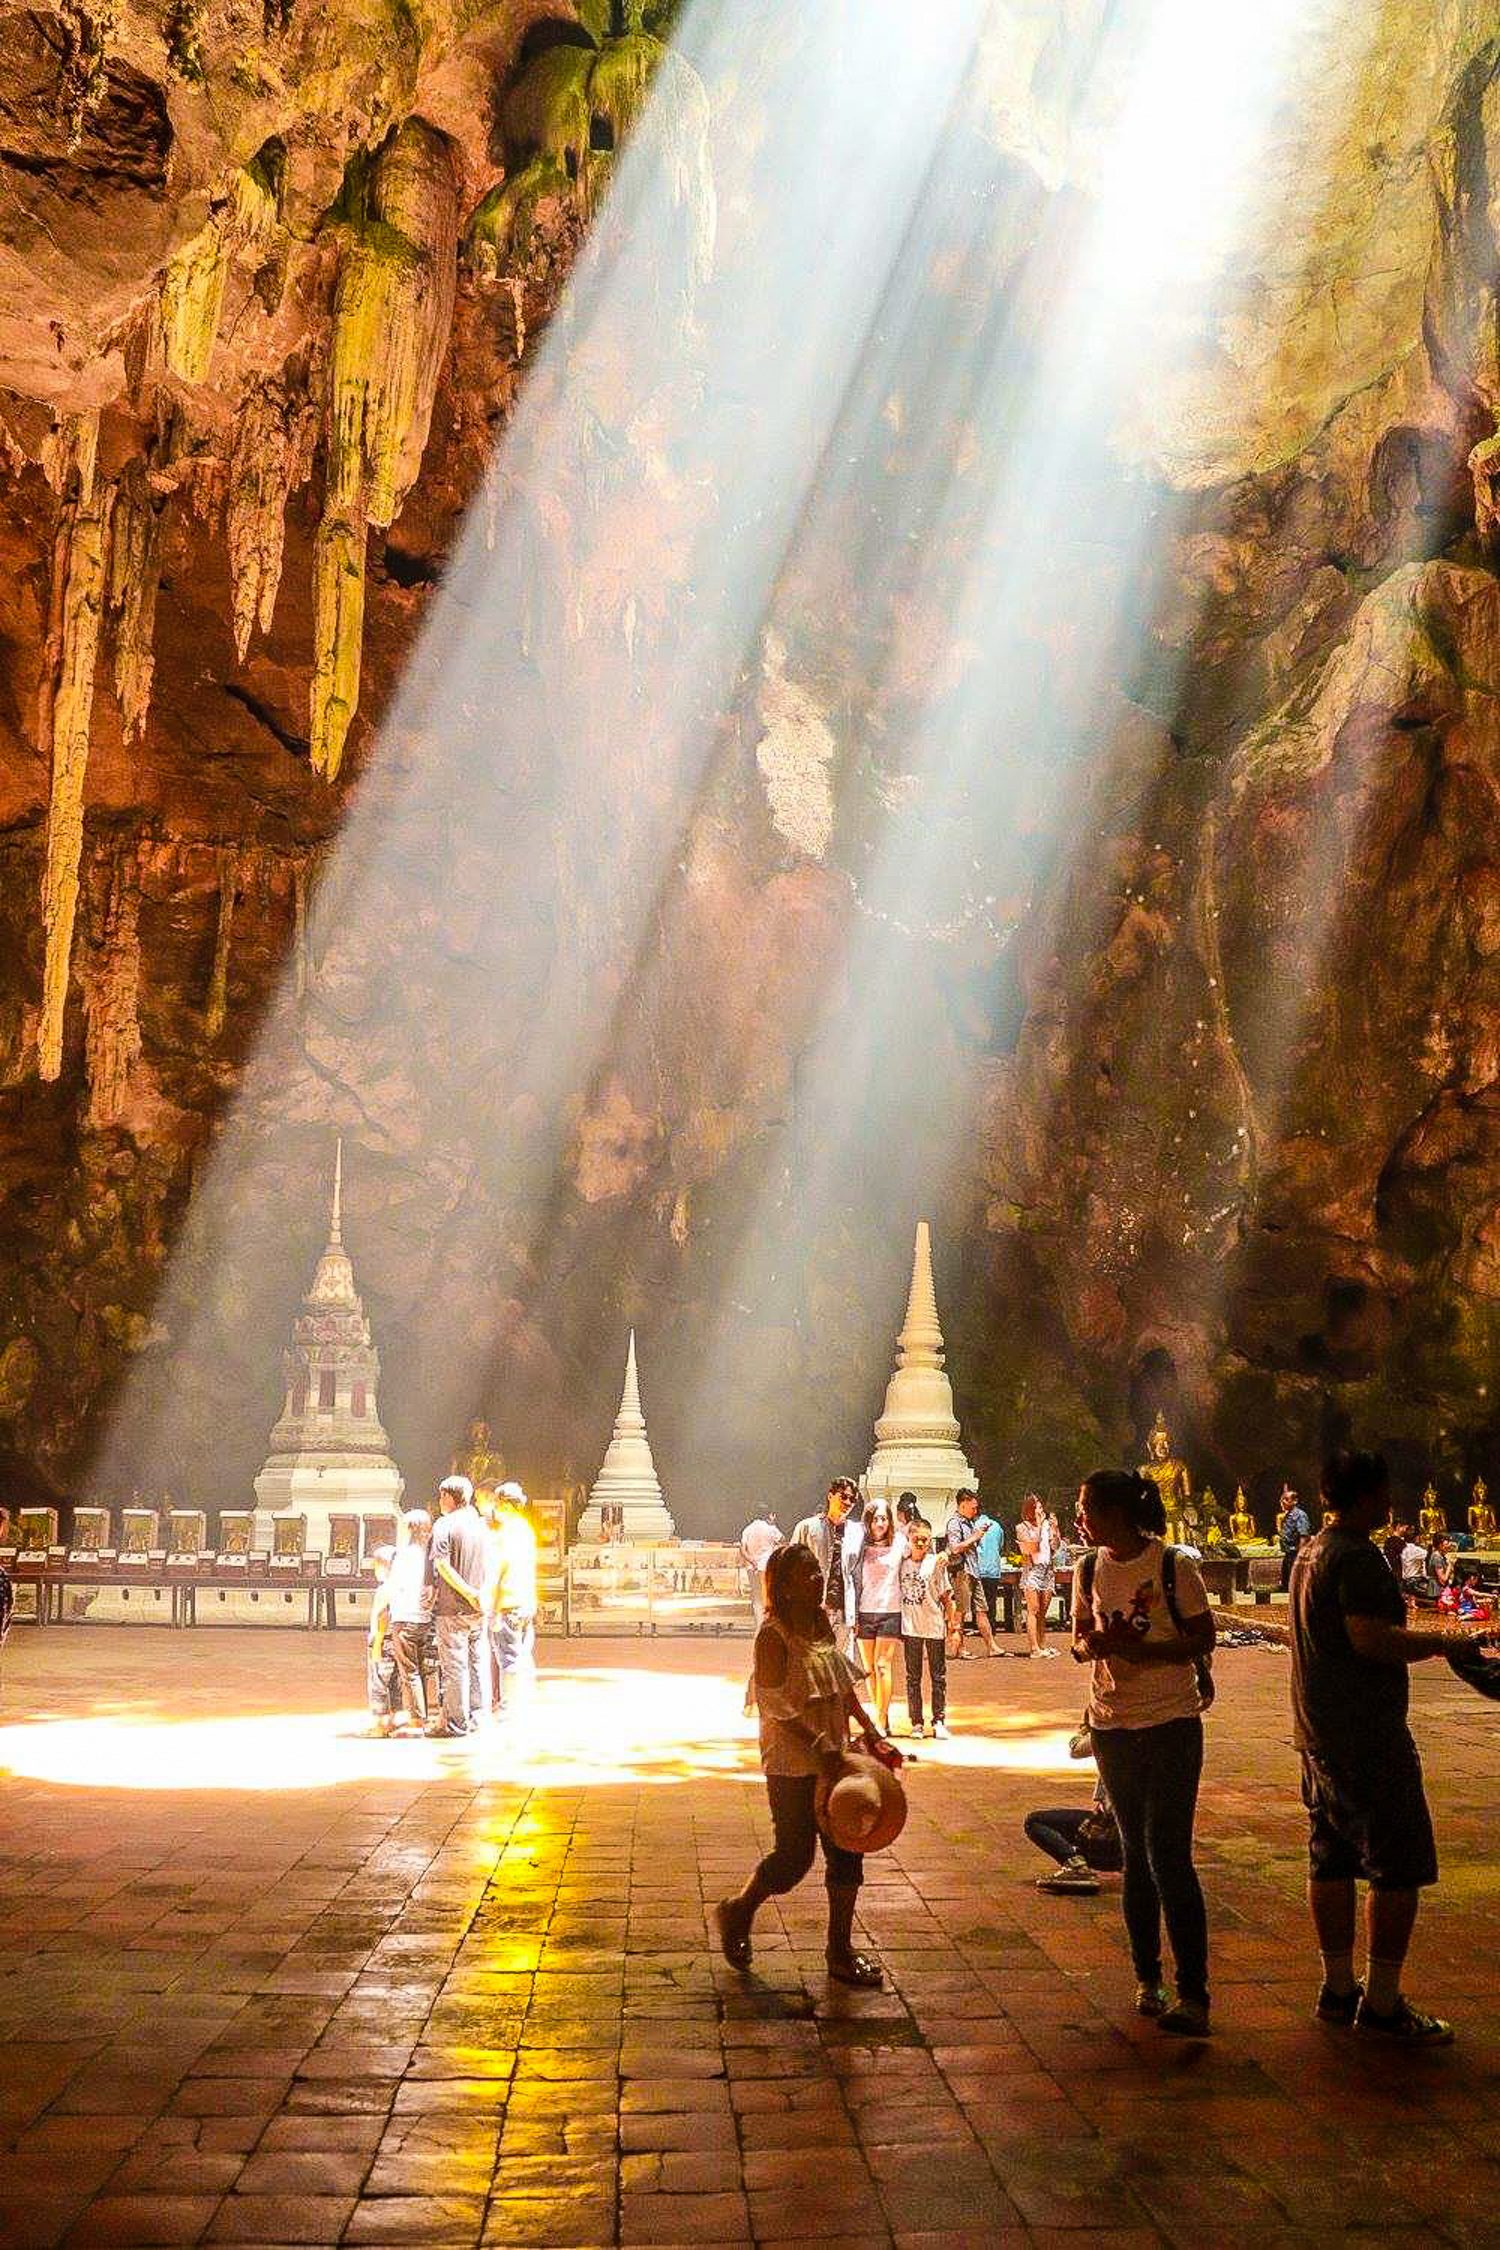 Sun rays in Tham Khao Luang Cave, Thailand.